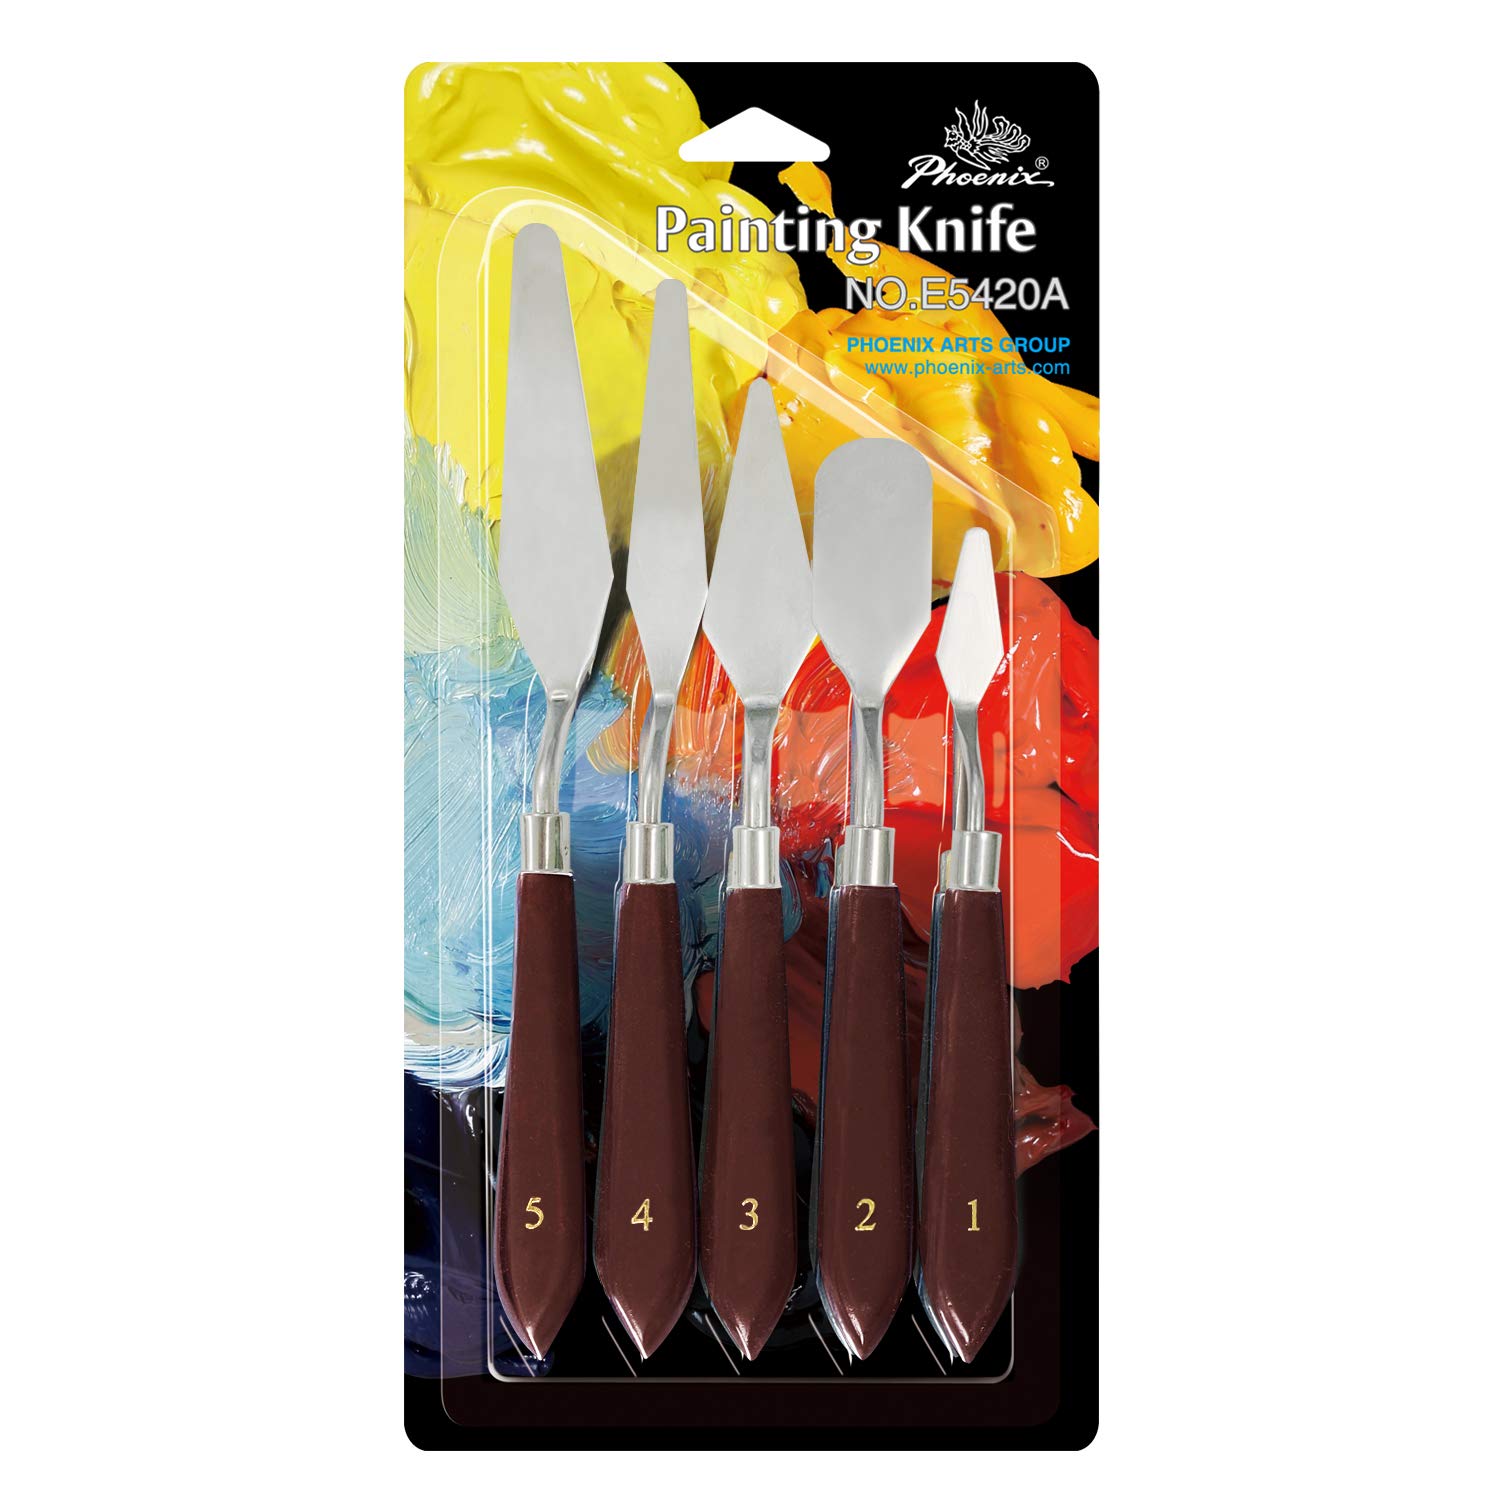  10 Pieces Palette Knife Set Stainless Steel Spatula